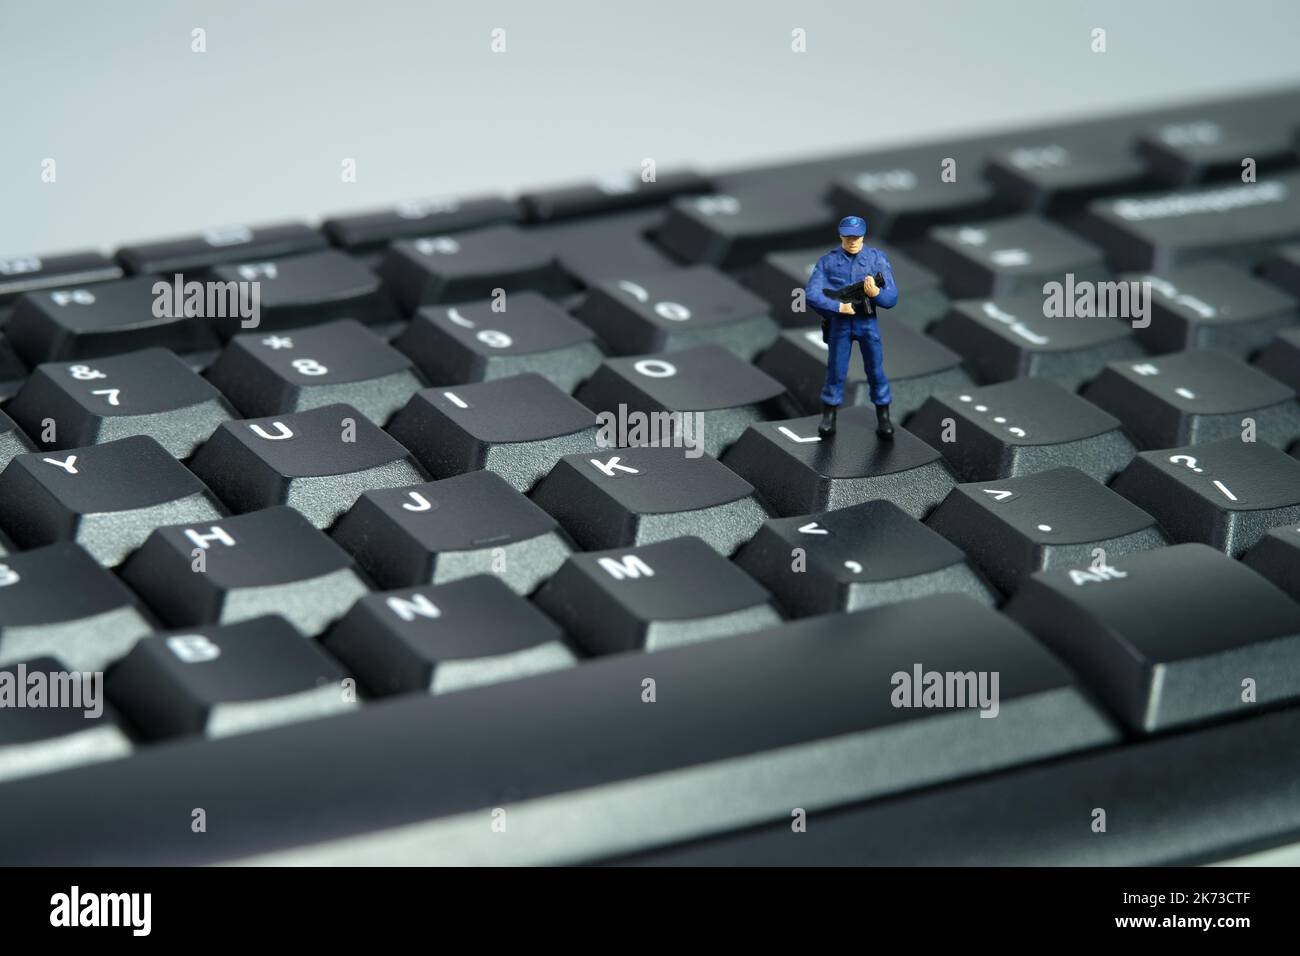 Miniature people toy figure photography. Data input privacy concept. A security officer standing above keyboard. Isolated on white background. Image p Stock Photo